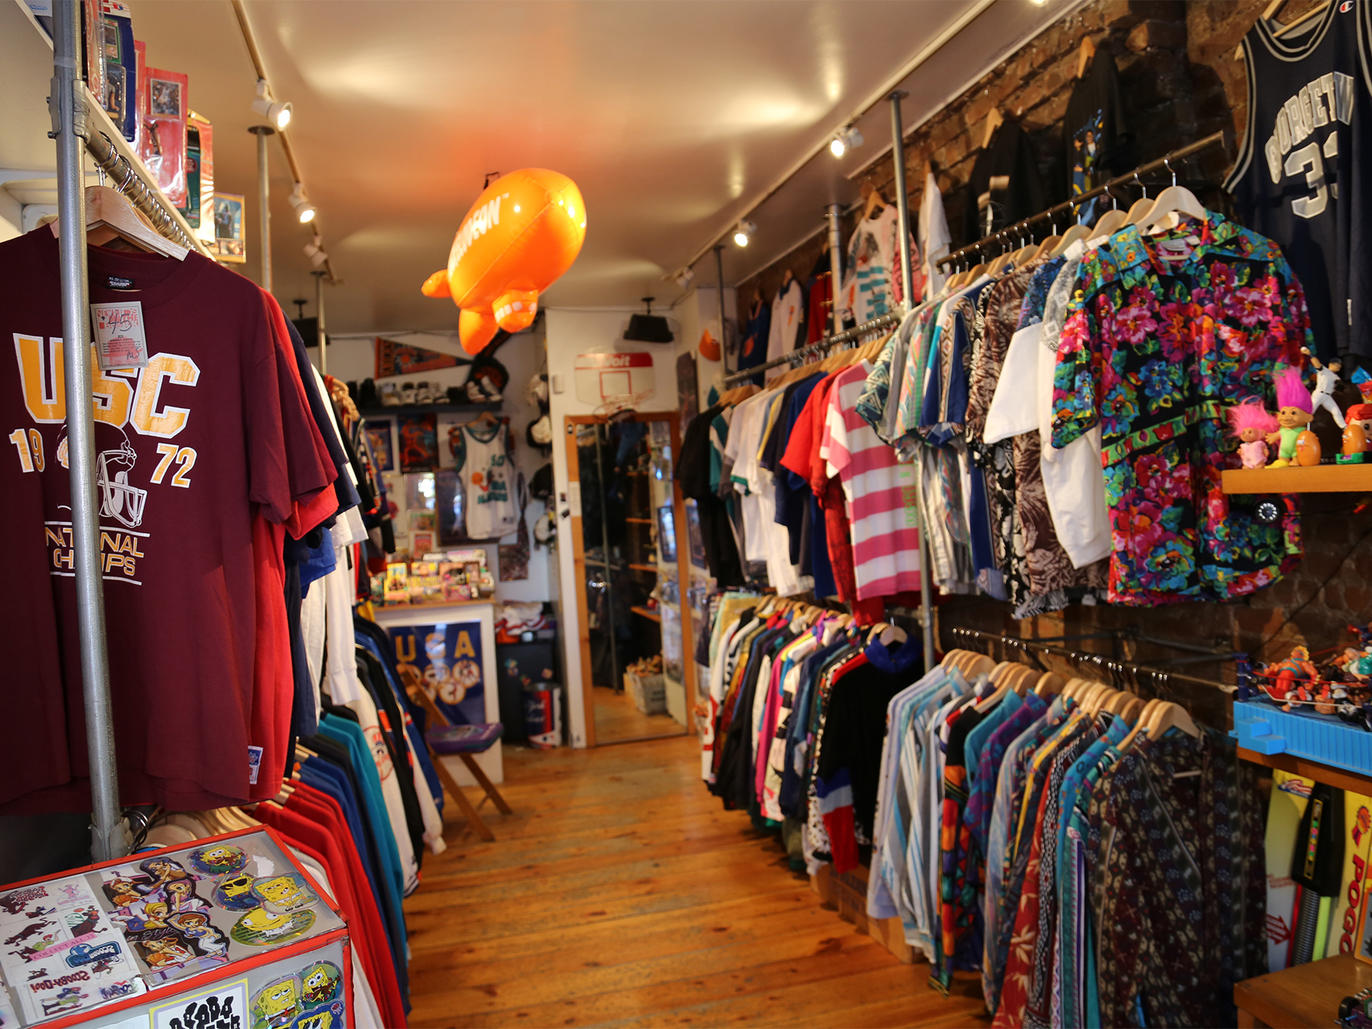 Vintage New York shopping: The best vintage shops in NYC